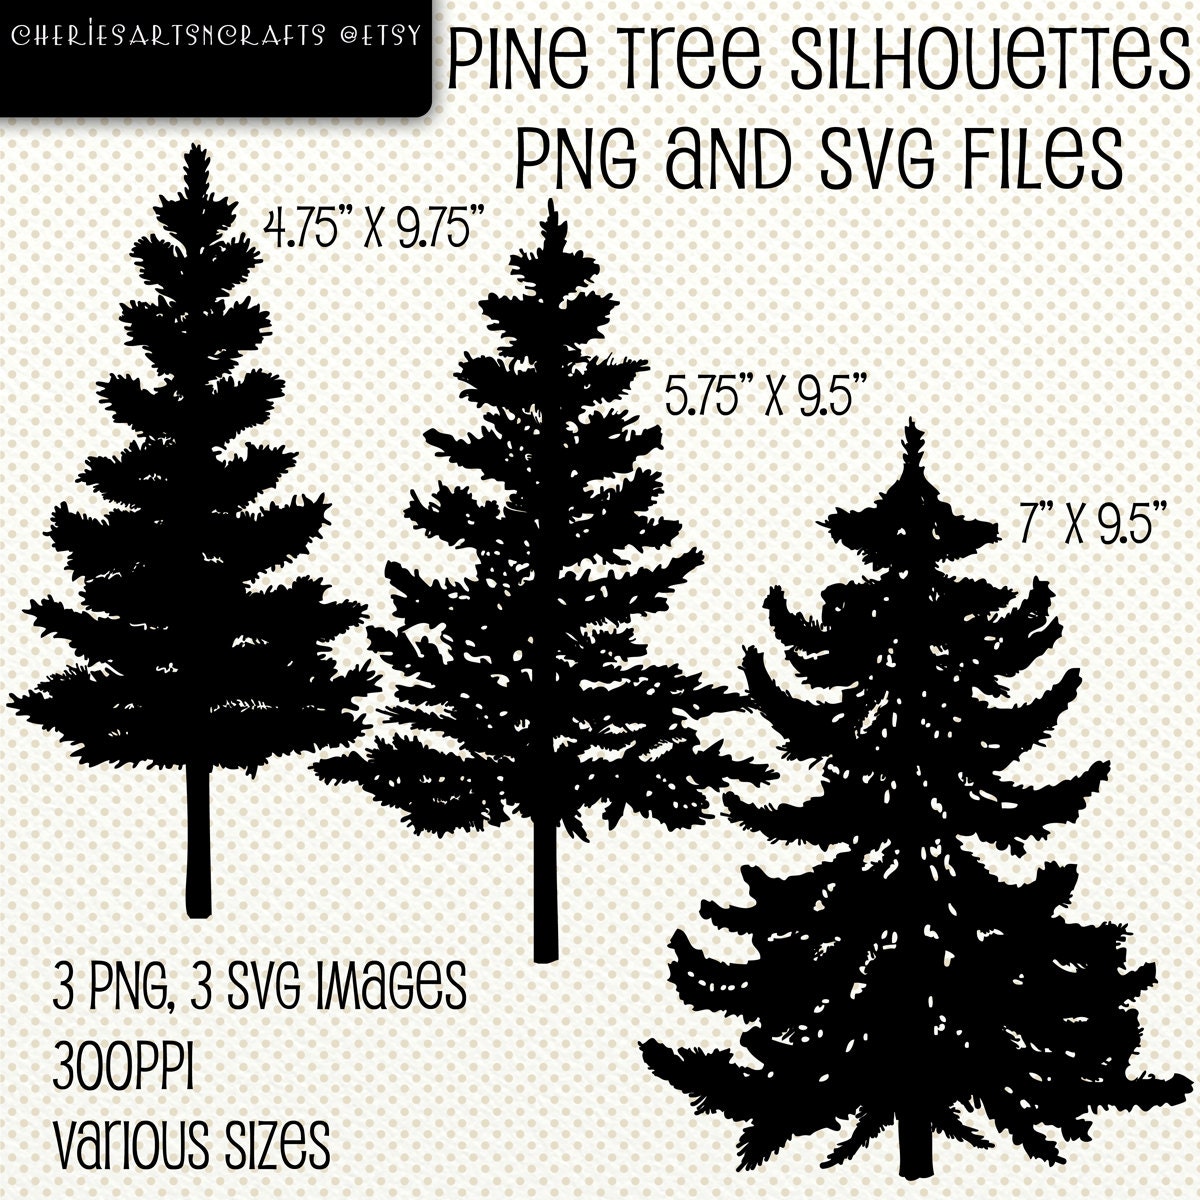 Download Pine Trees Silhouettes PNG and SVG Files Digital